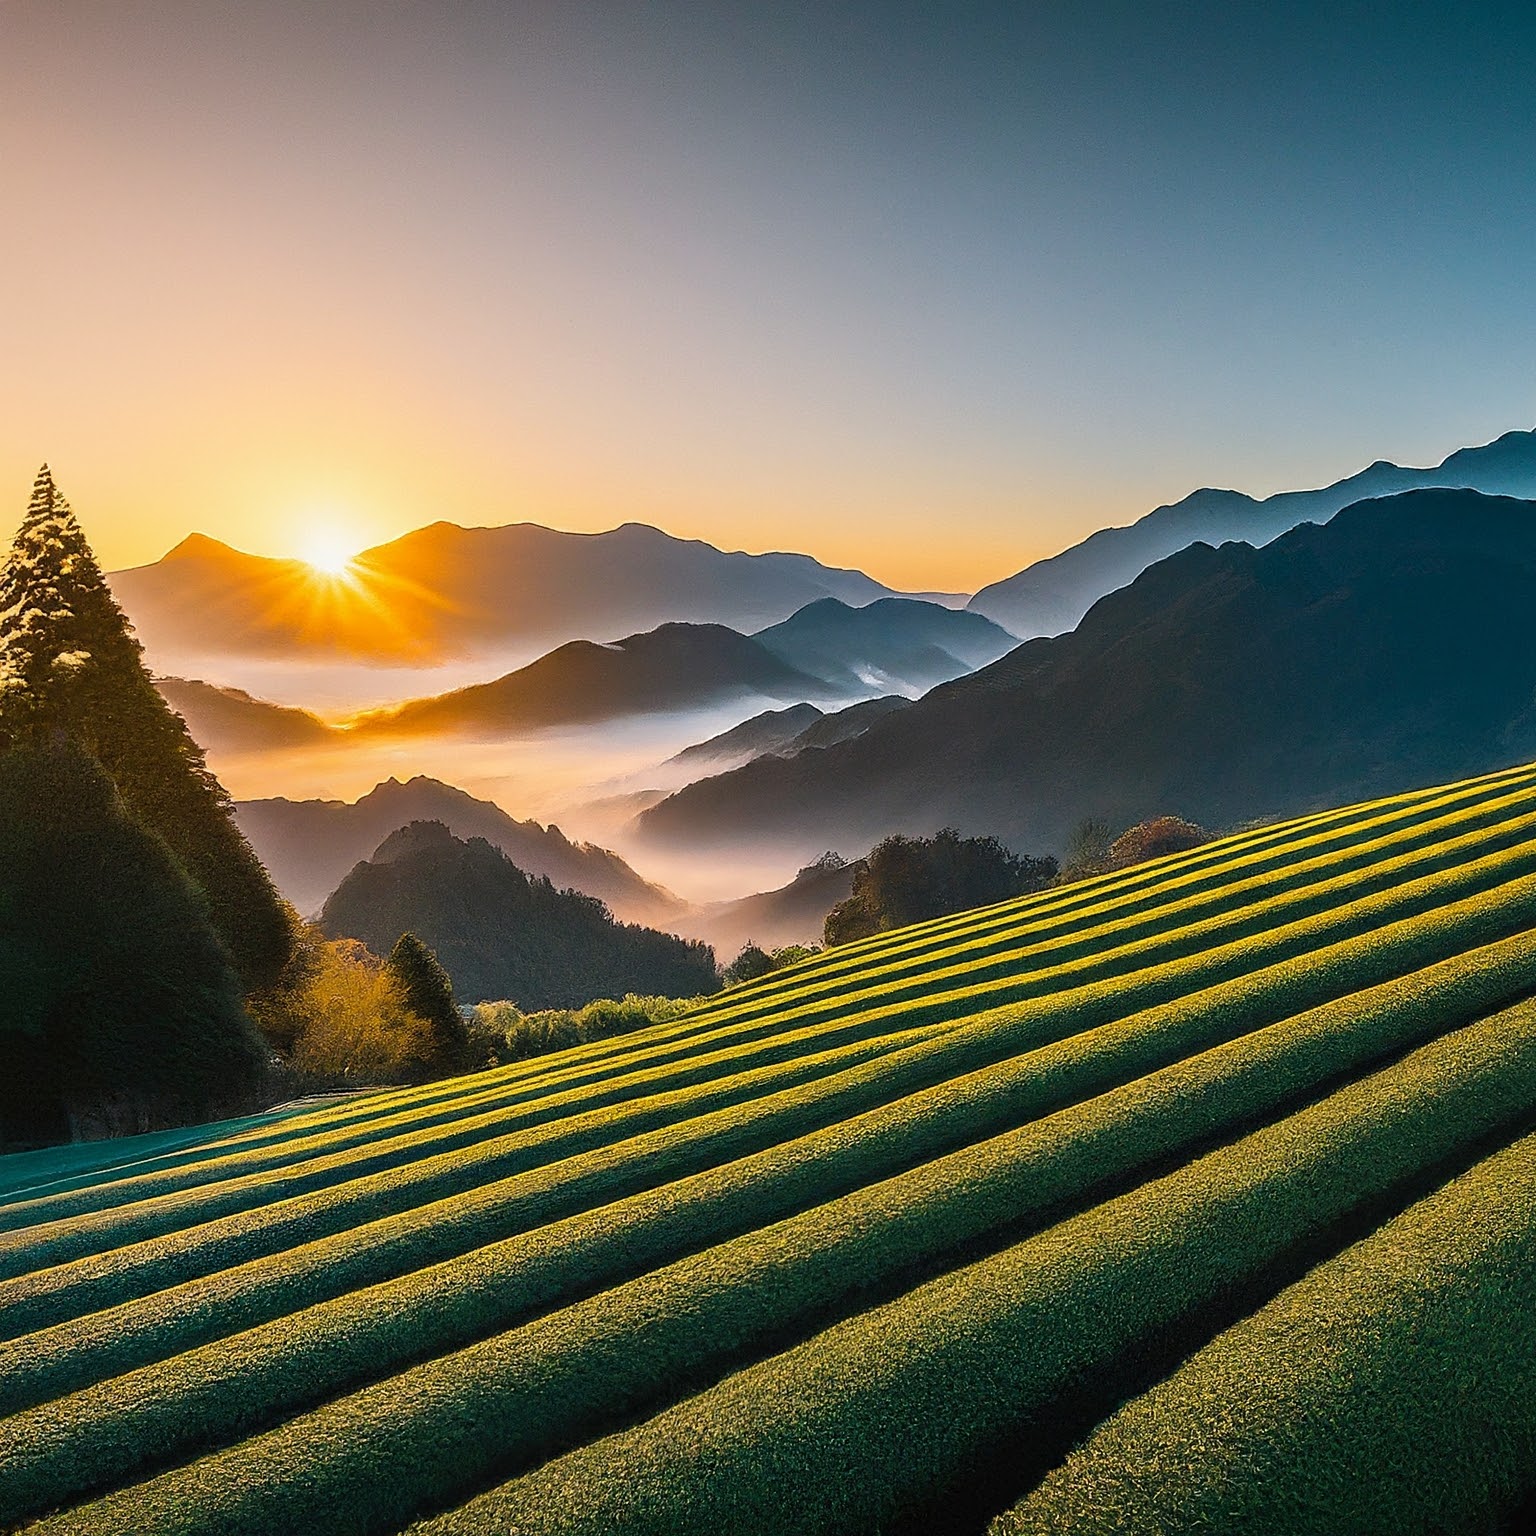 Alishan Sunrise, Taiwan, with layers of mist on mountains and sunlight on tea plantations.